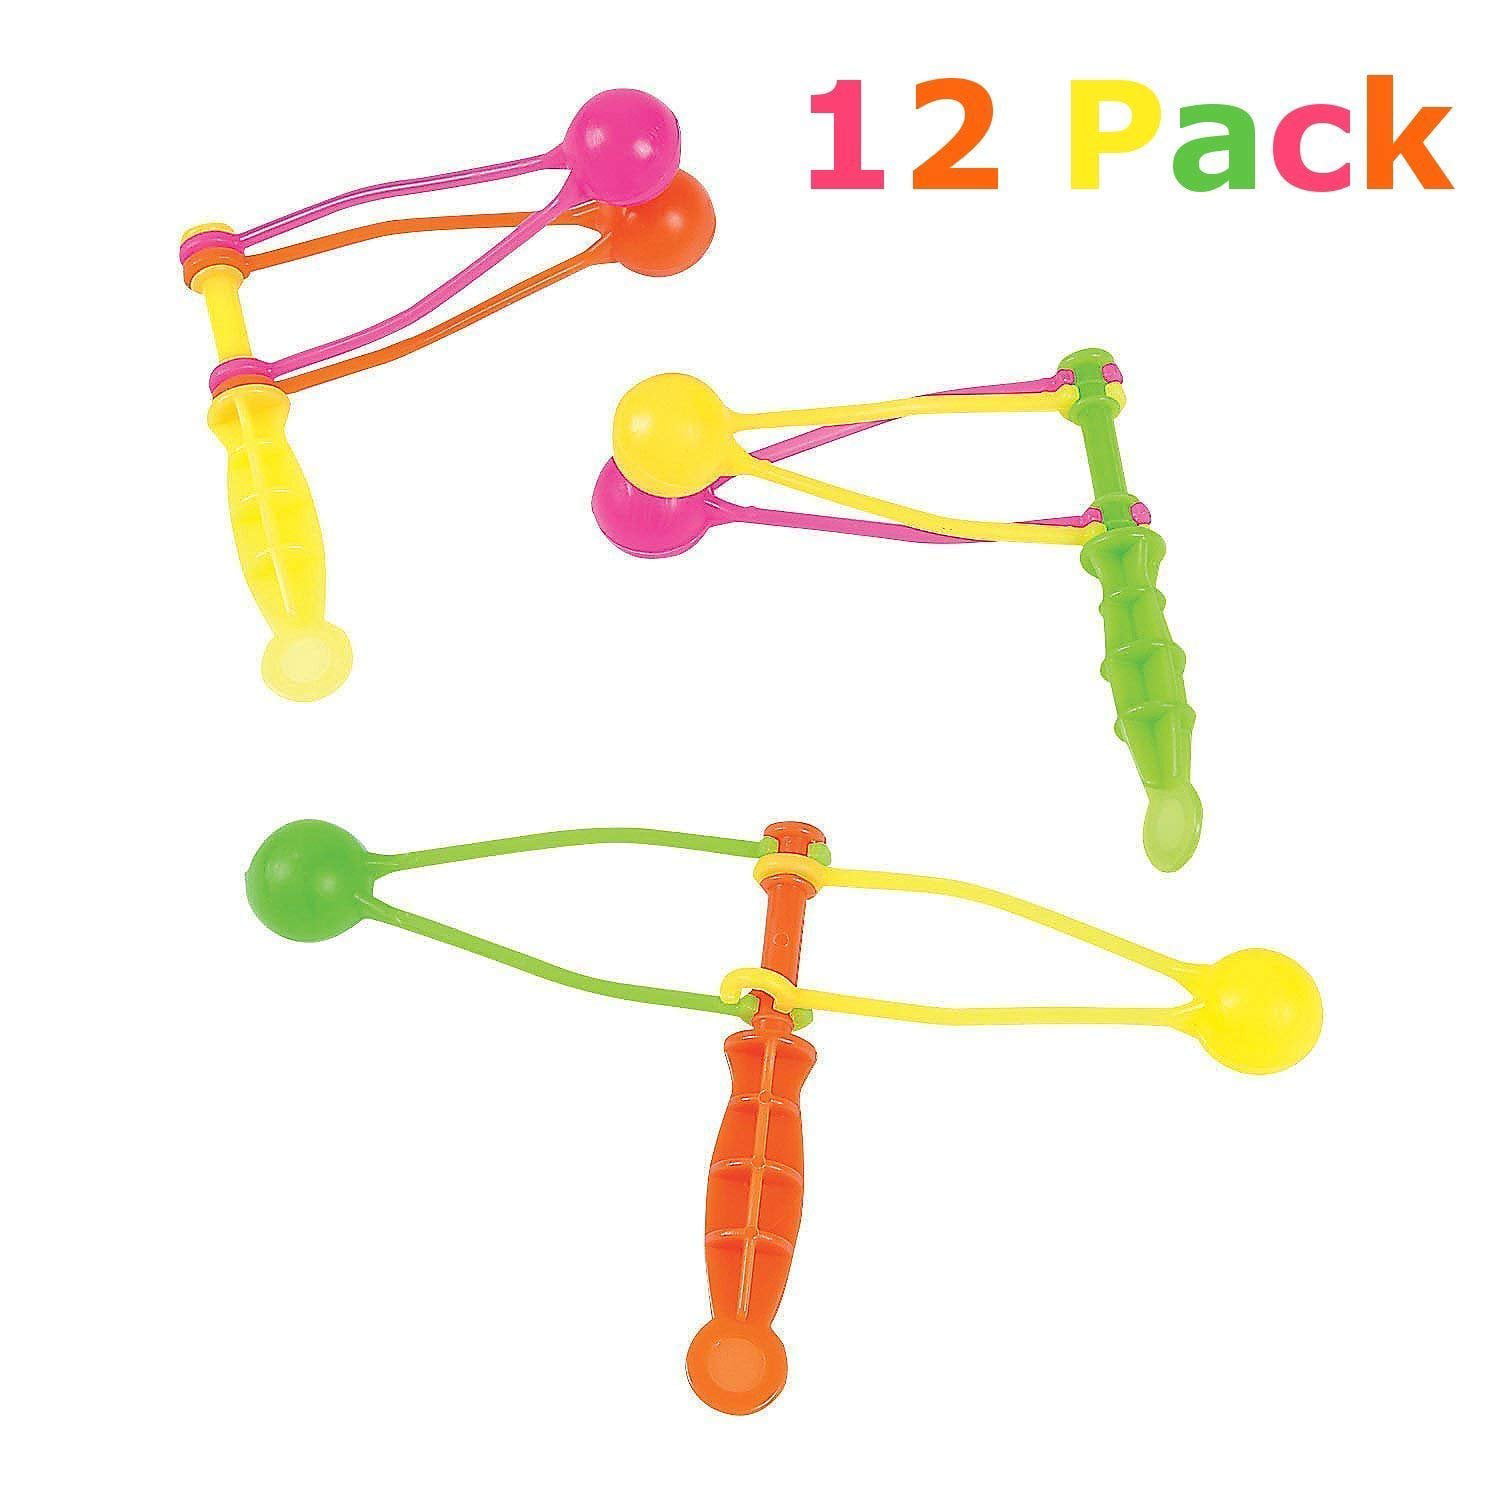 Sporting Events Perfect Noisemakers for Parties Birthday Surprise Party or any other Noise Requiring Occasion! Graduation Celebrations Zugar Land 12 Large 8inch Neon Clackers